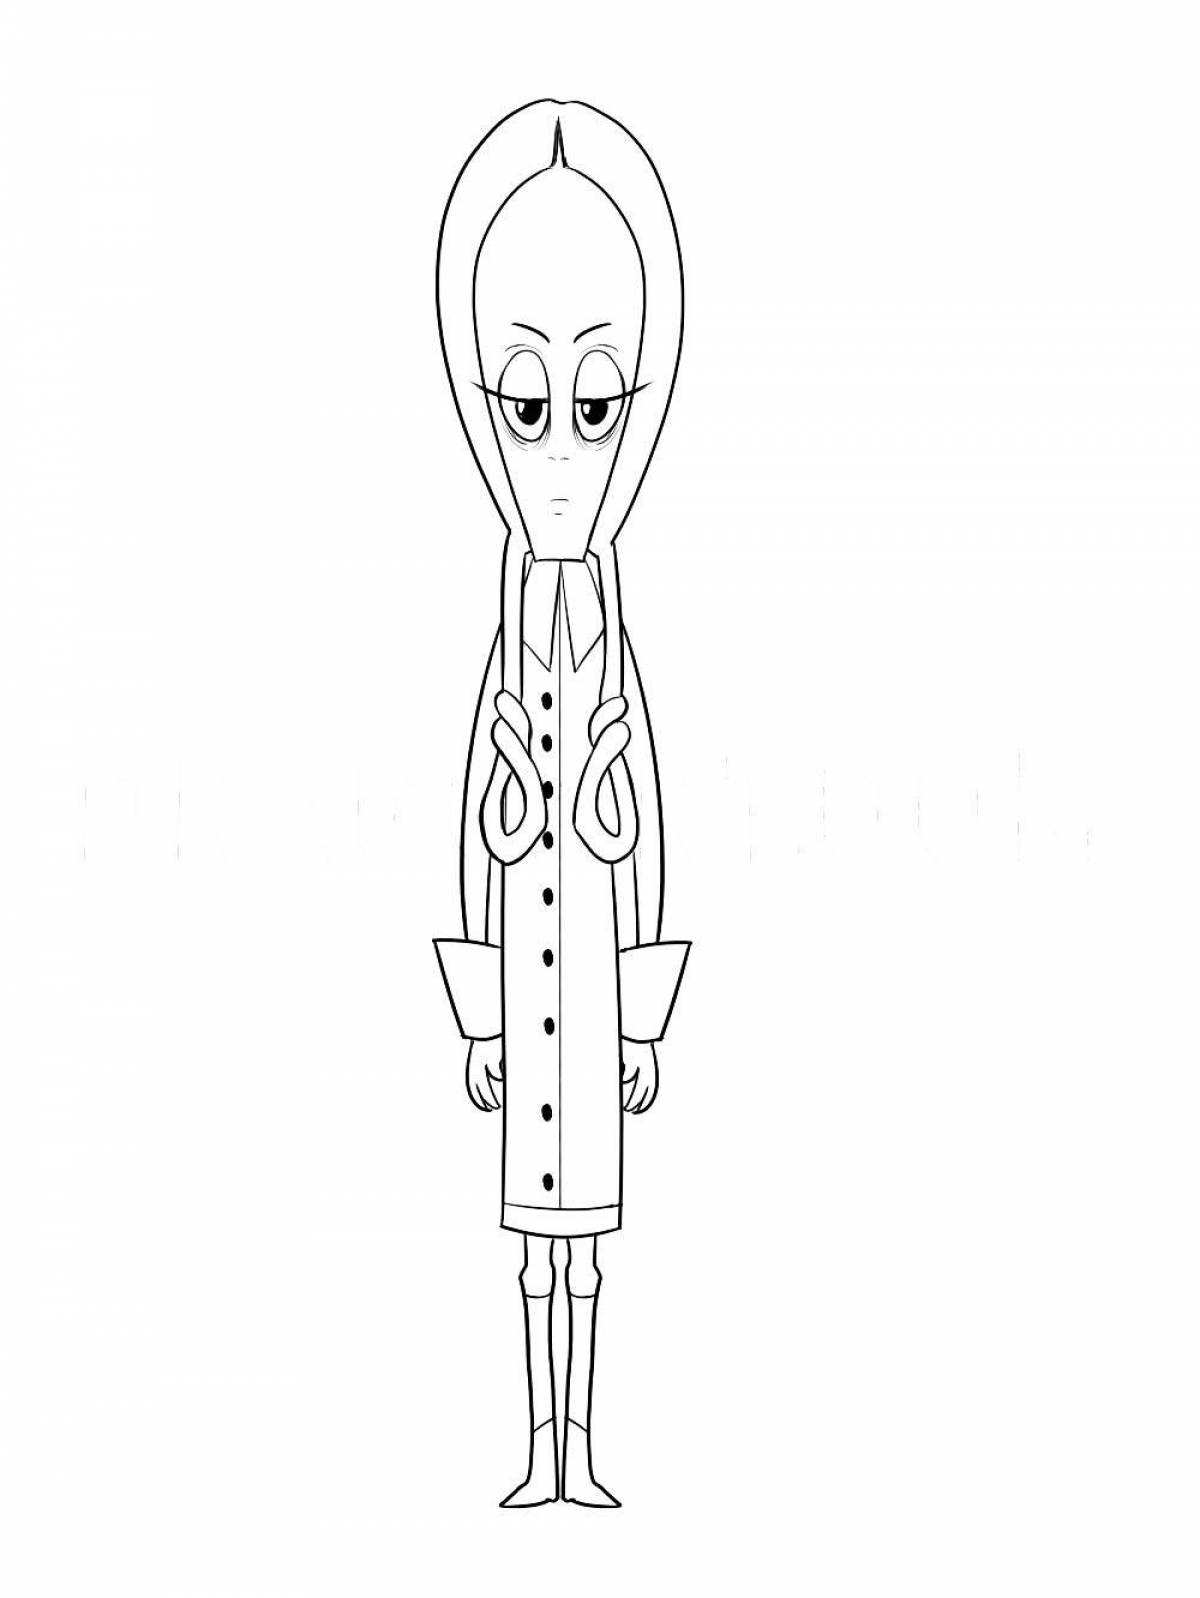 Crazy Addams Family Coloring Page